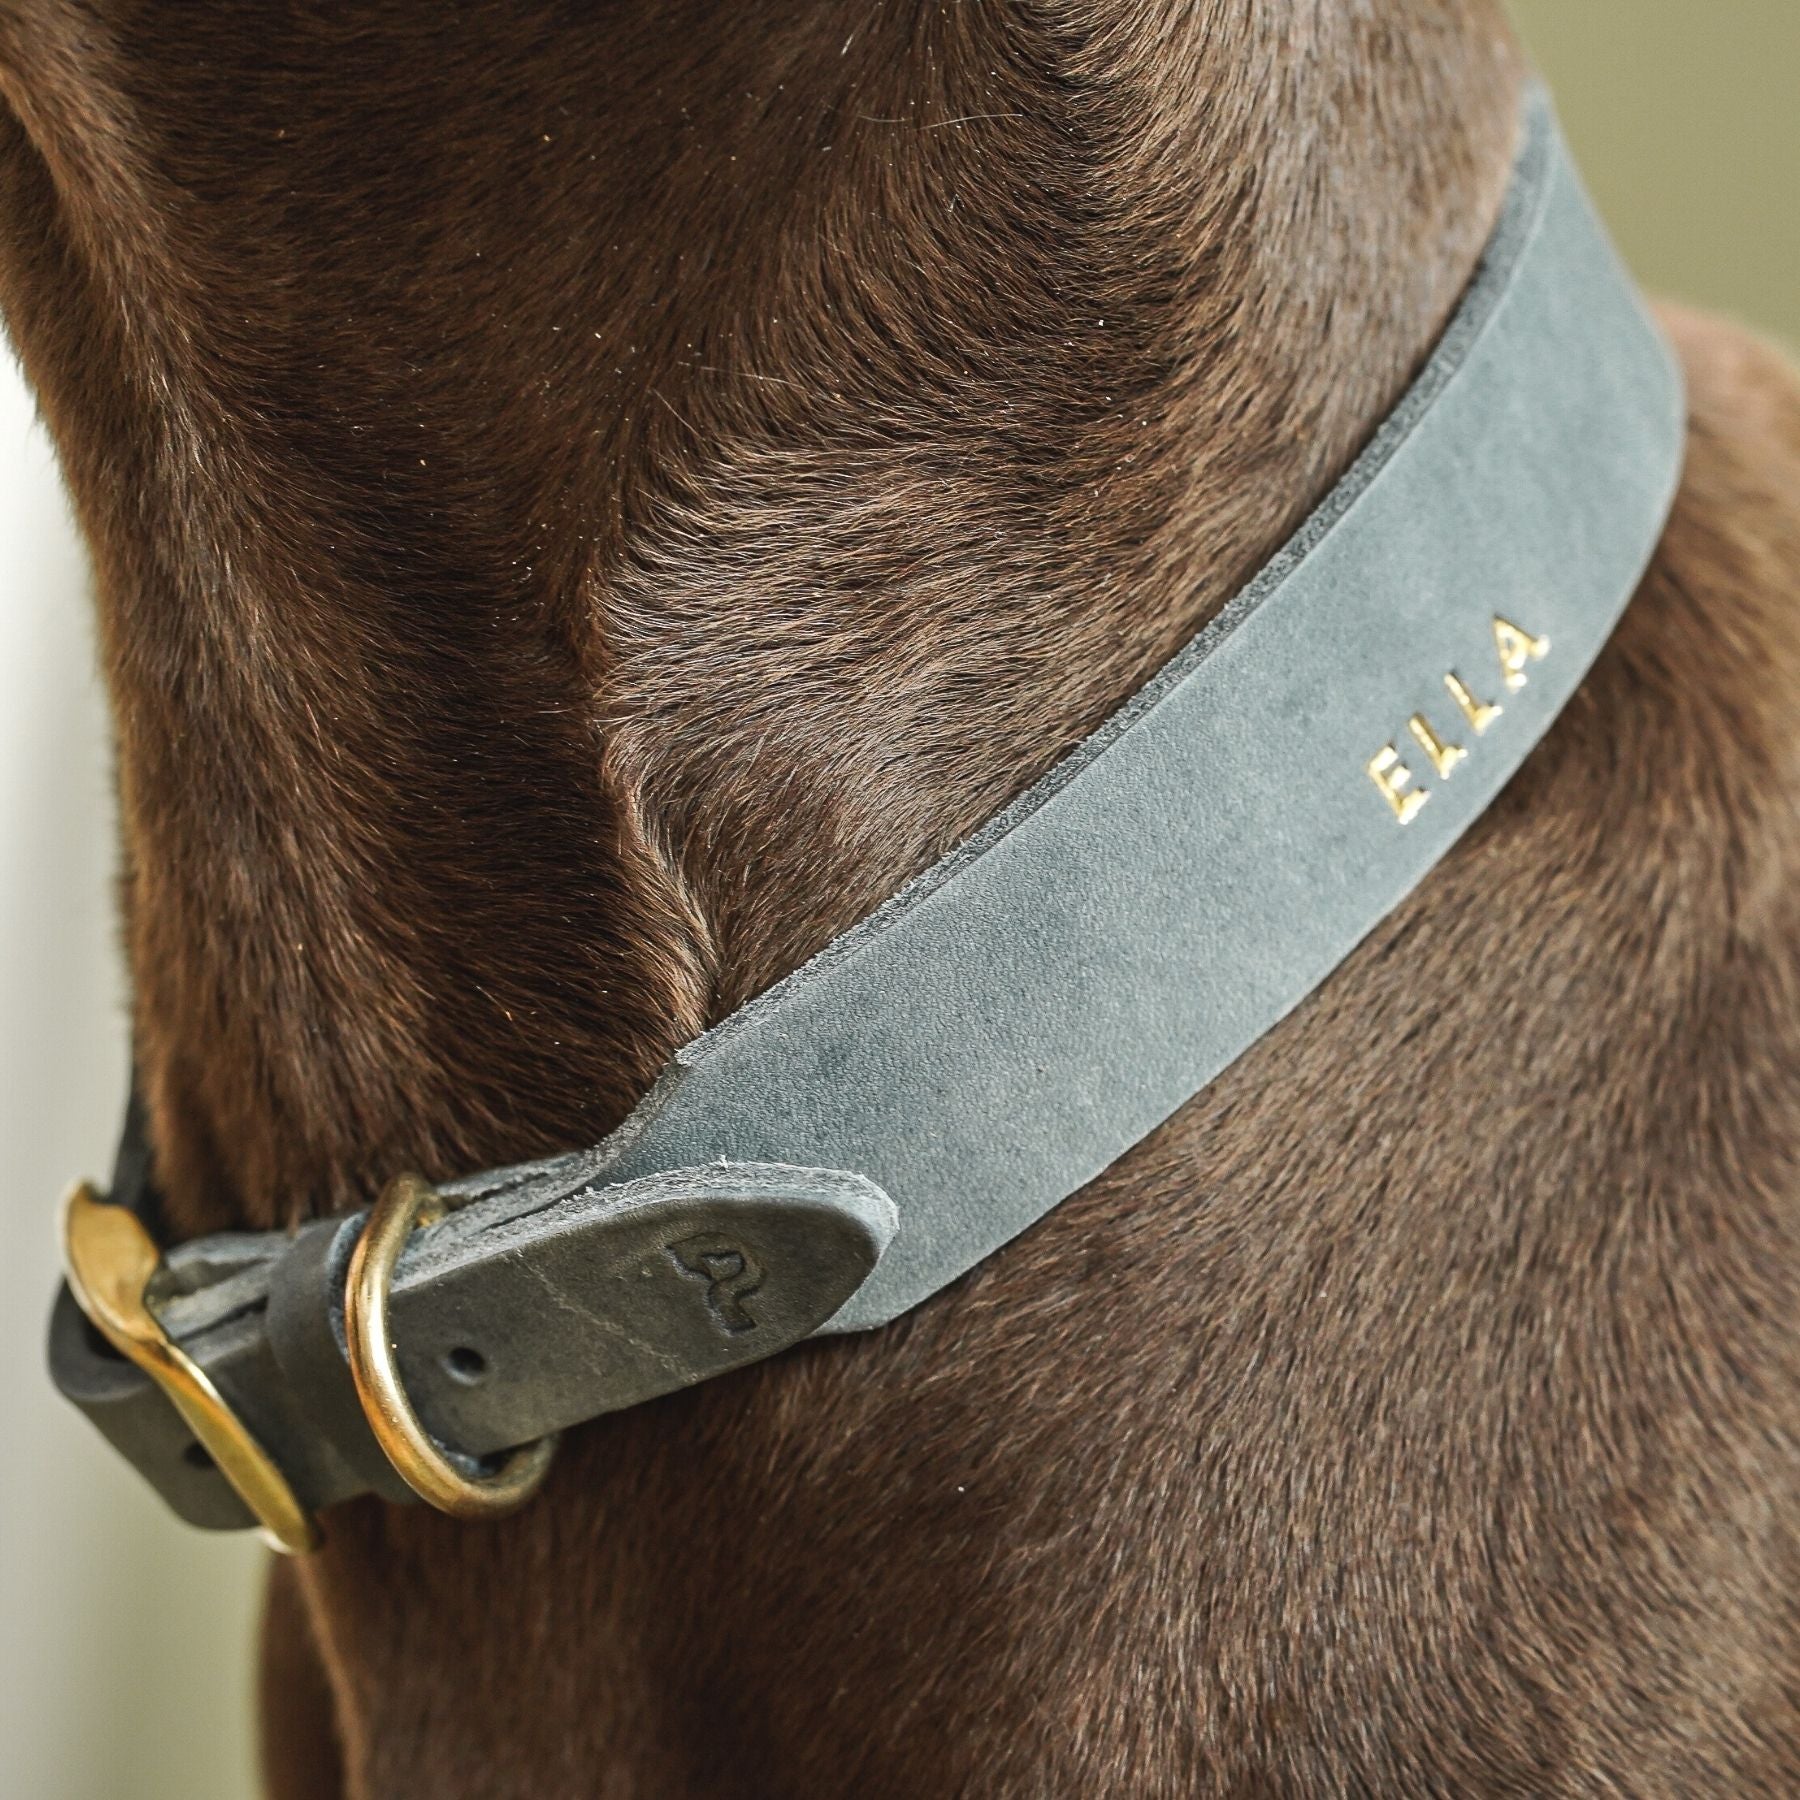 Personalizable collar with name | Stone gray